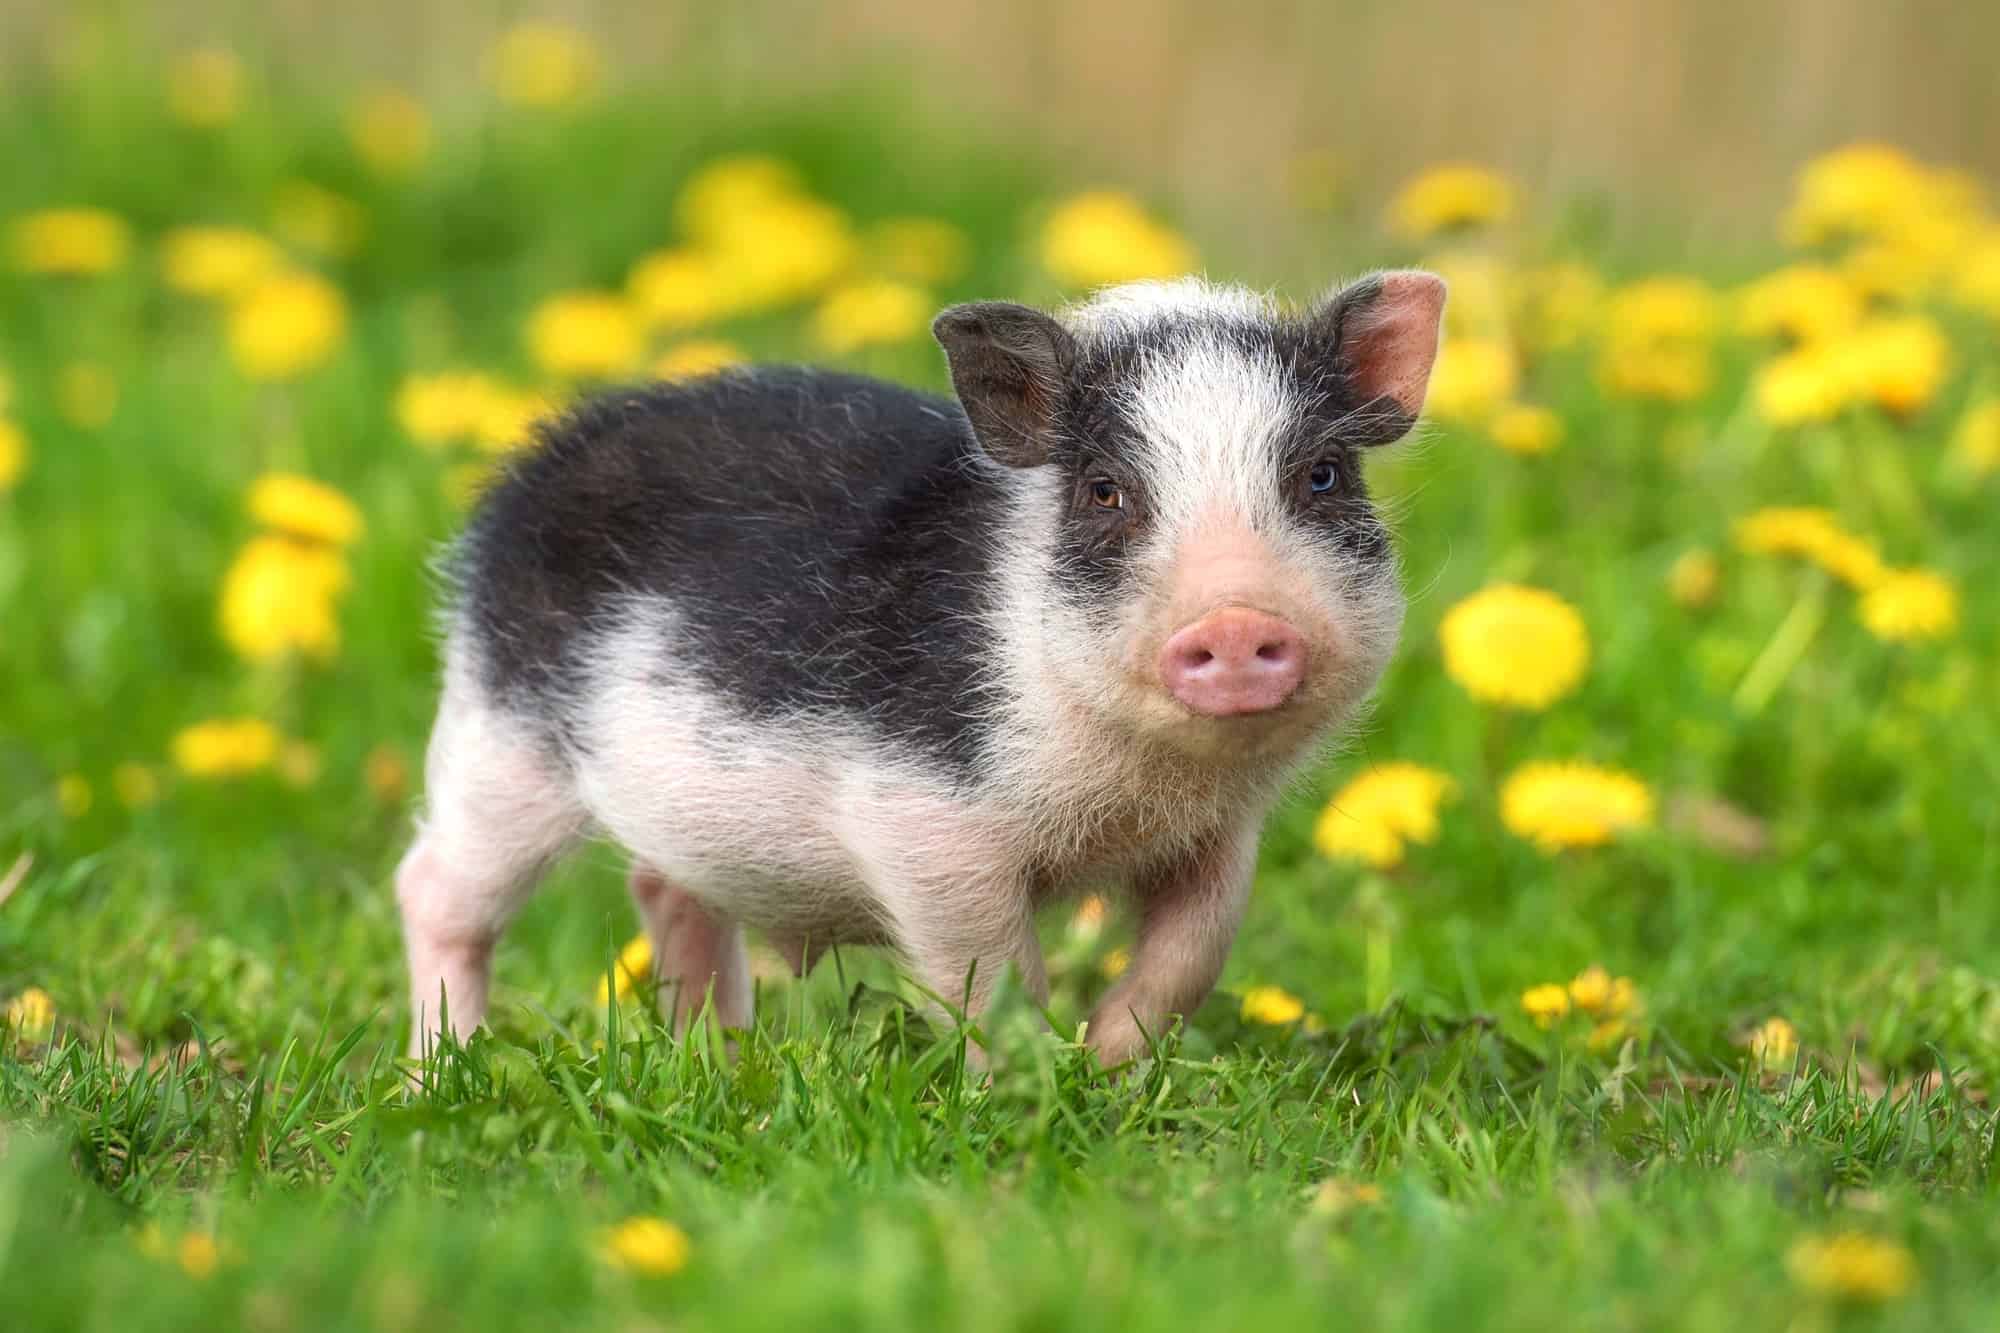 Shocking Facts About Teacup Pigs You Need to Know